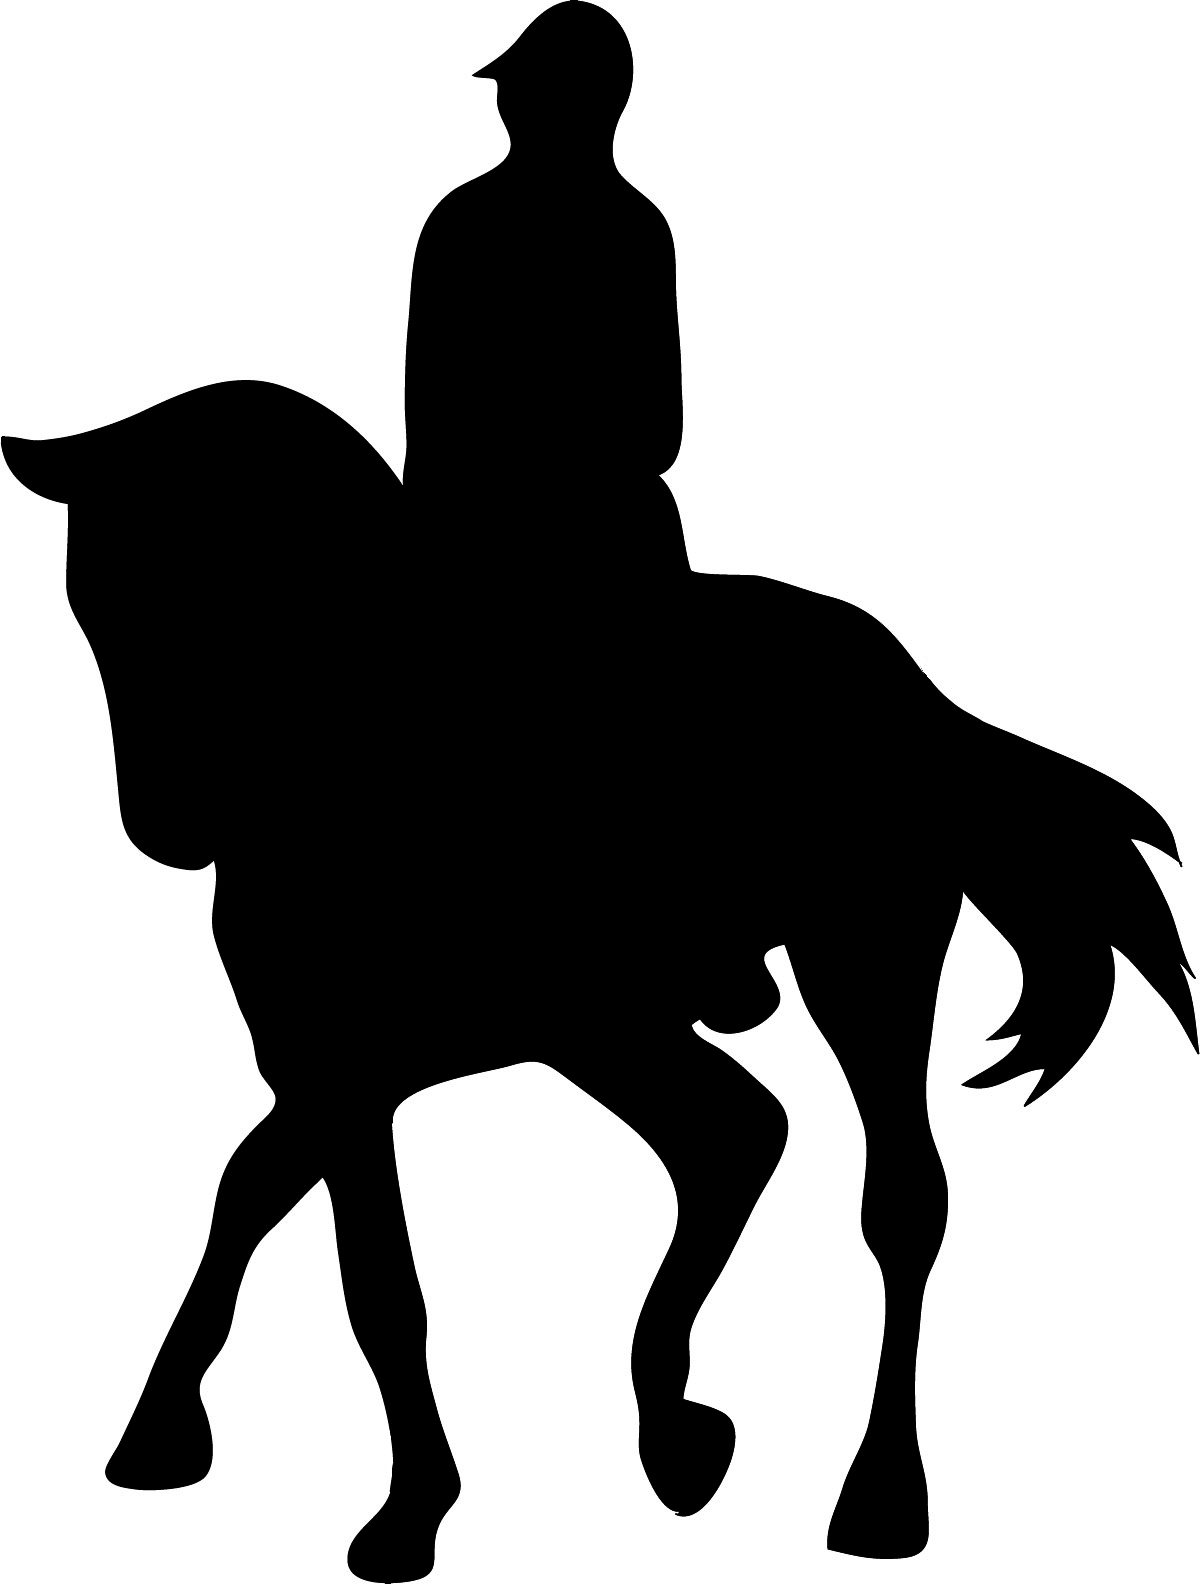 Horse Silhouette With Horse And Horseman